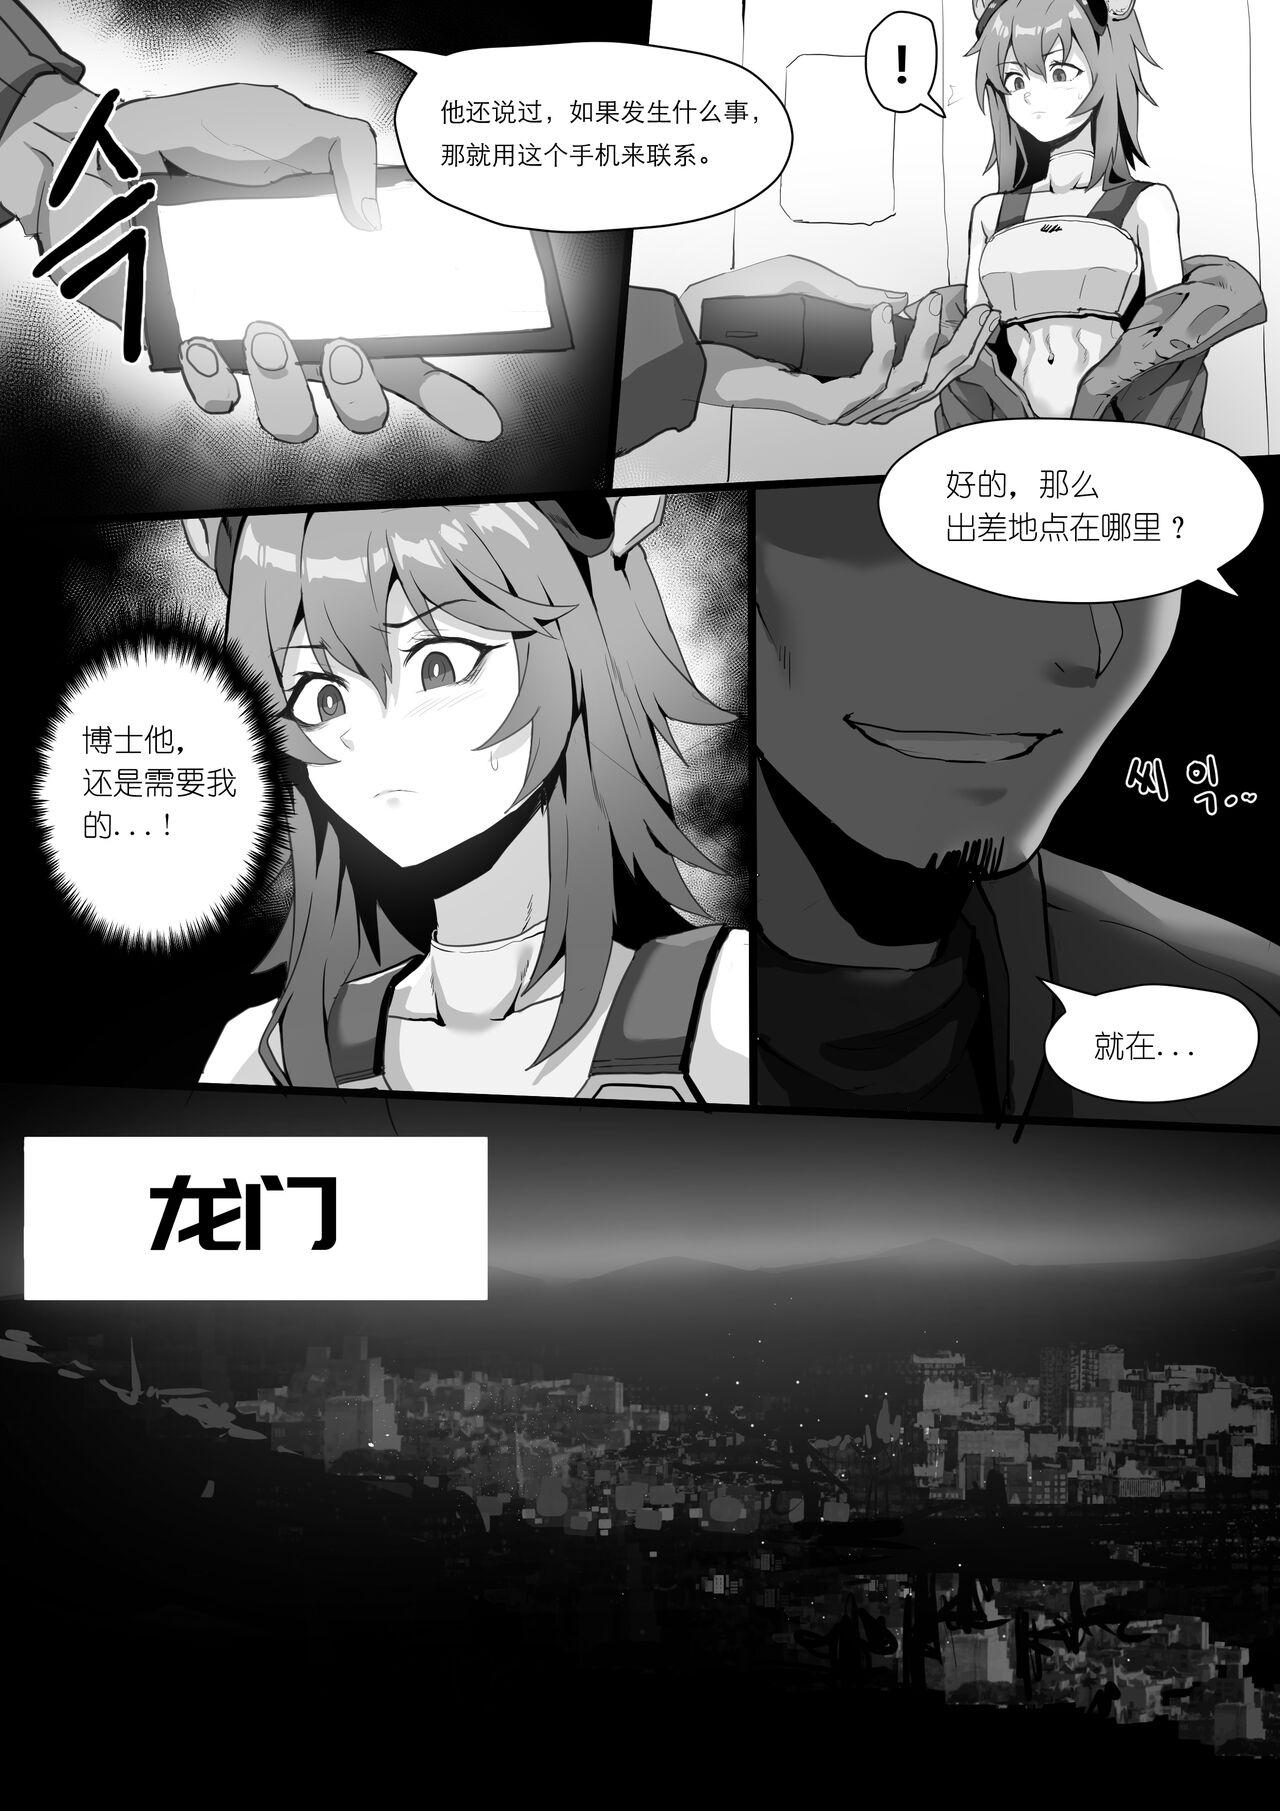 Creampie 欲望方舟记录3 - Arknights Made - Page 7